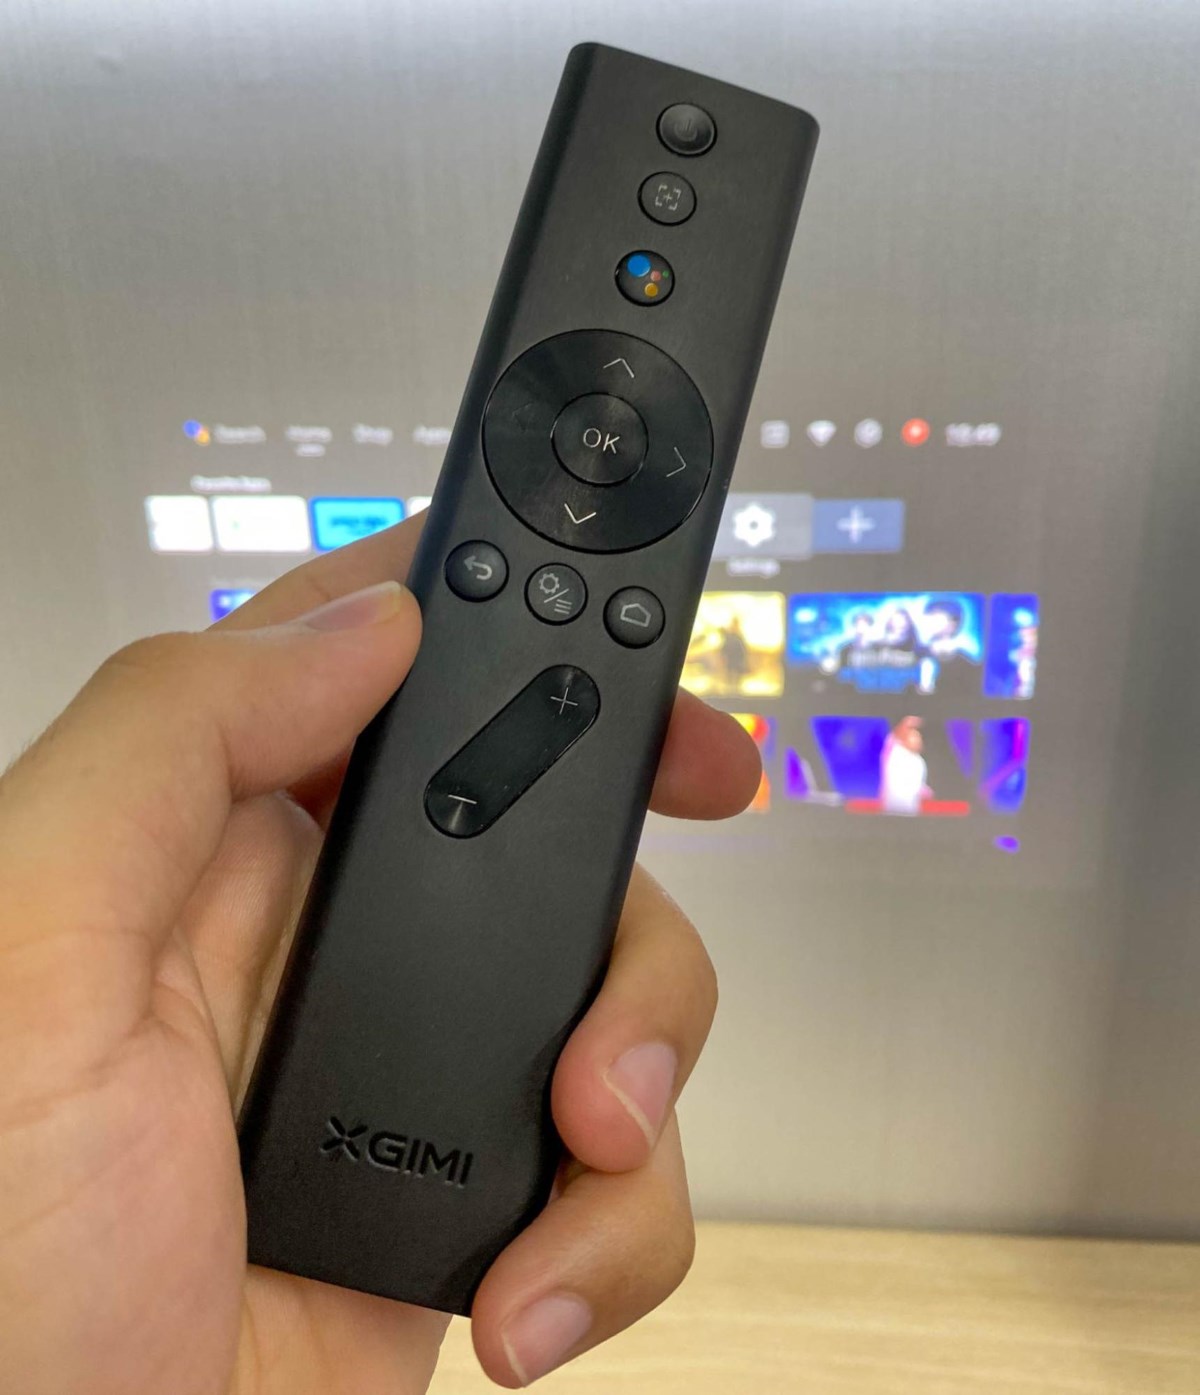 a hand is holding an XGIMI projector remote in front of the projector screen